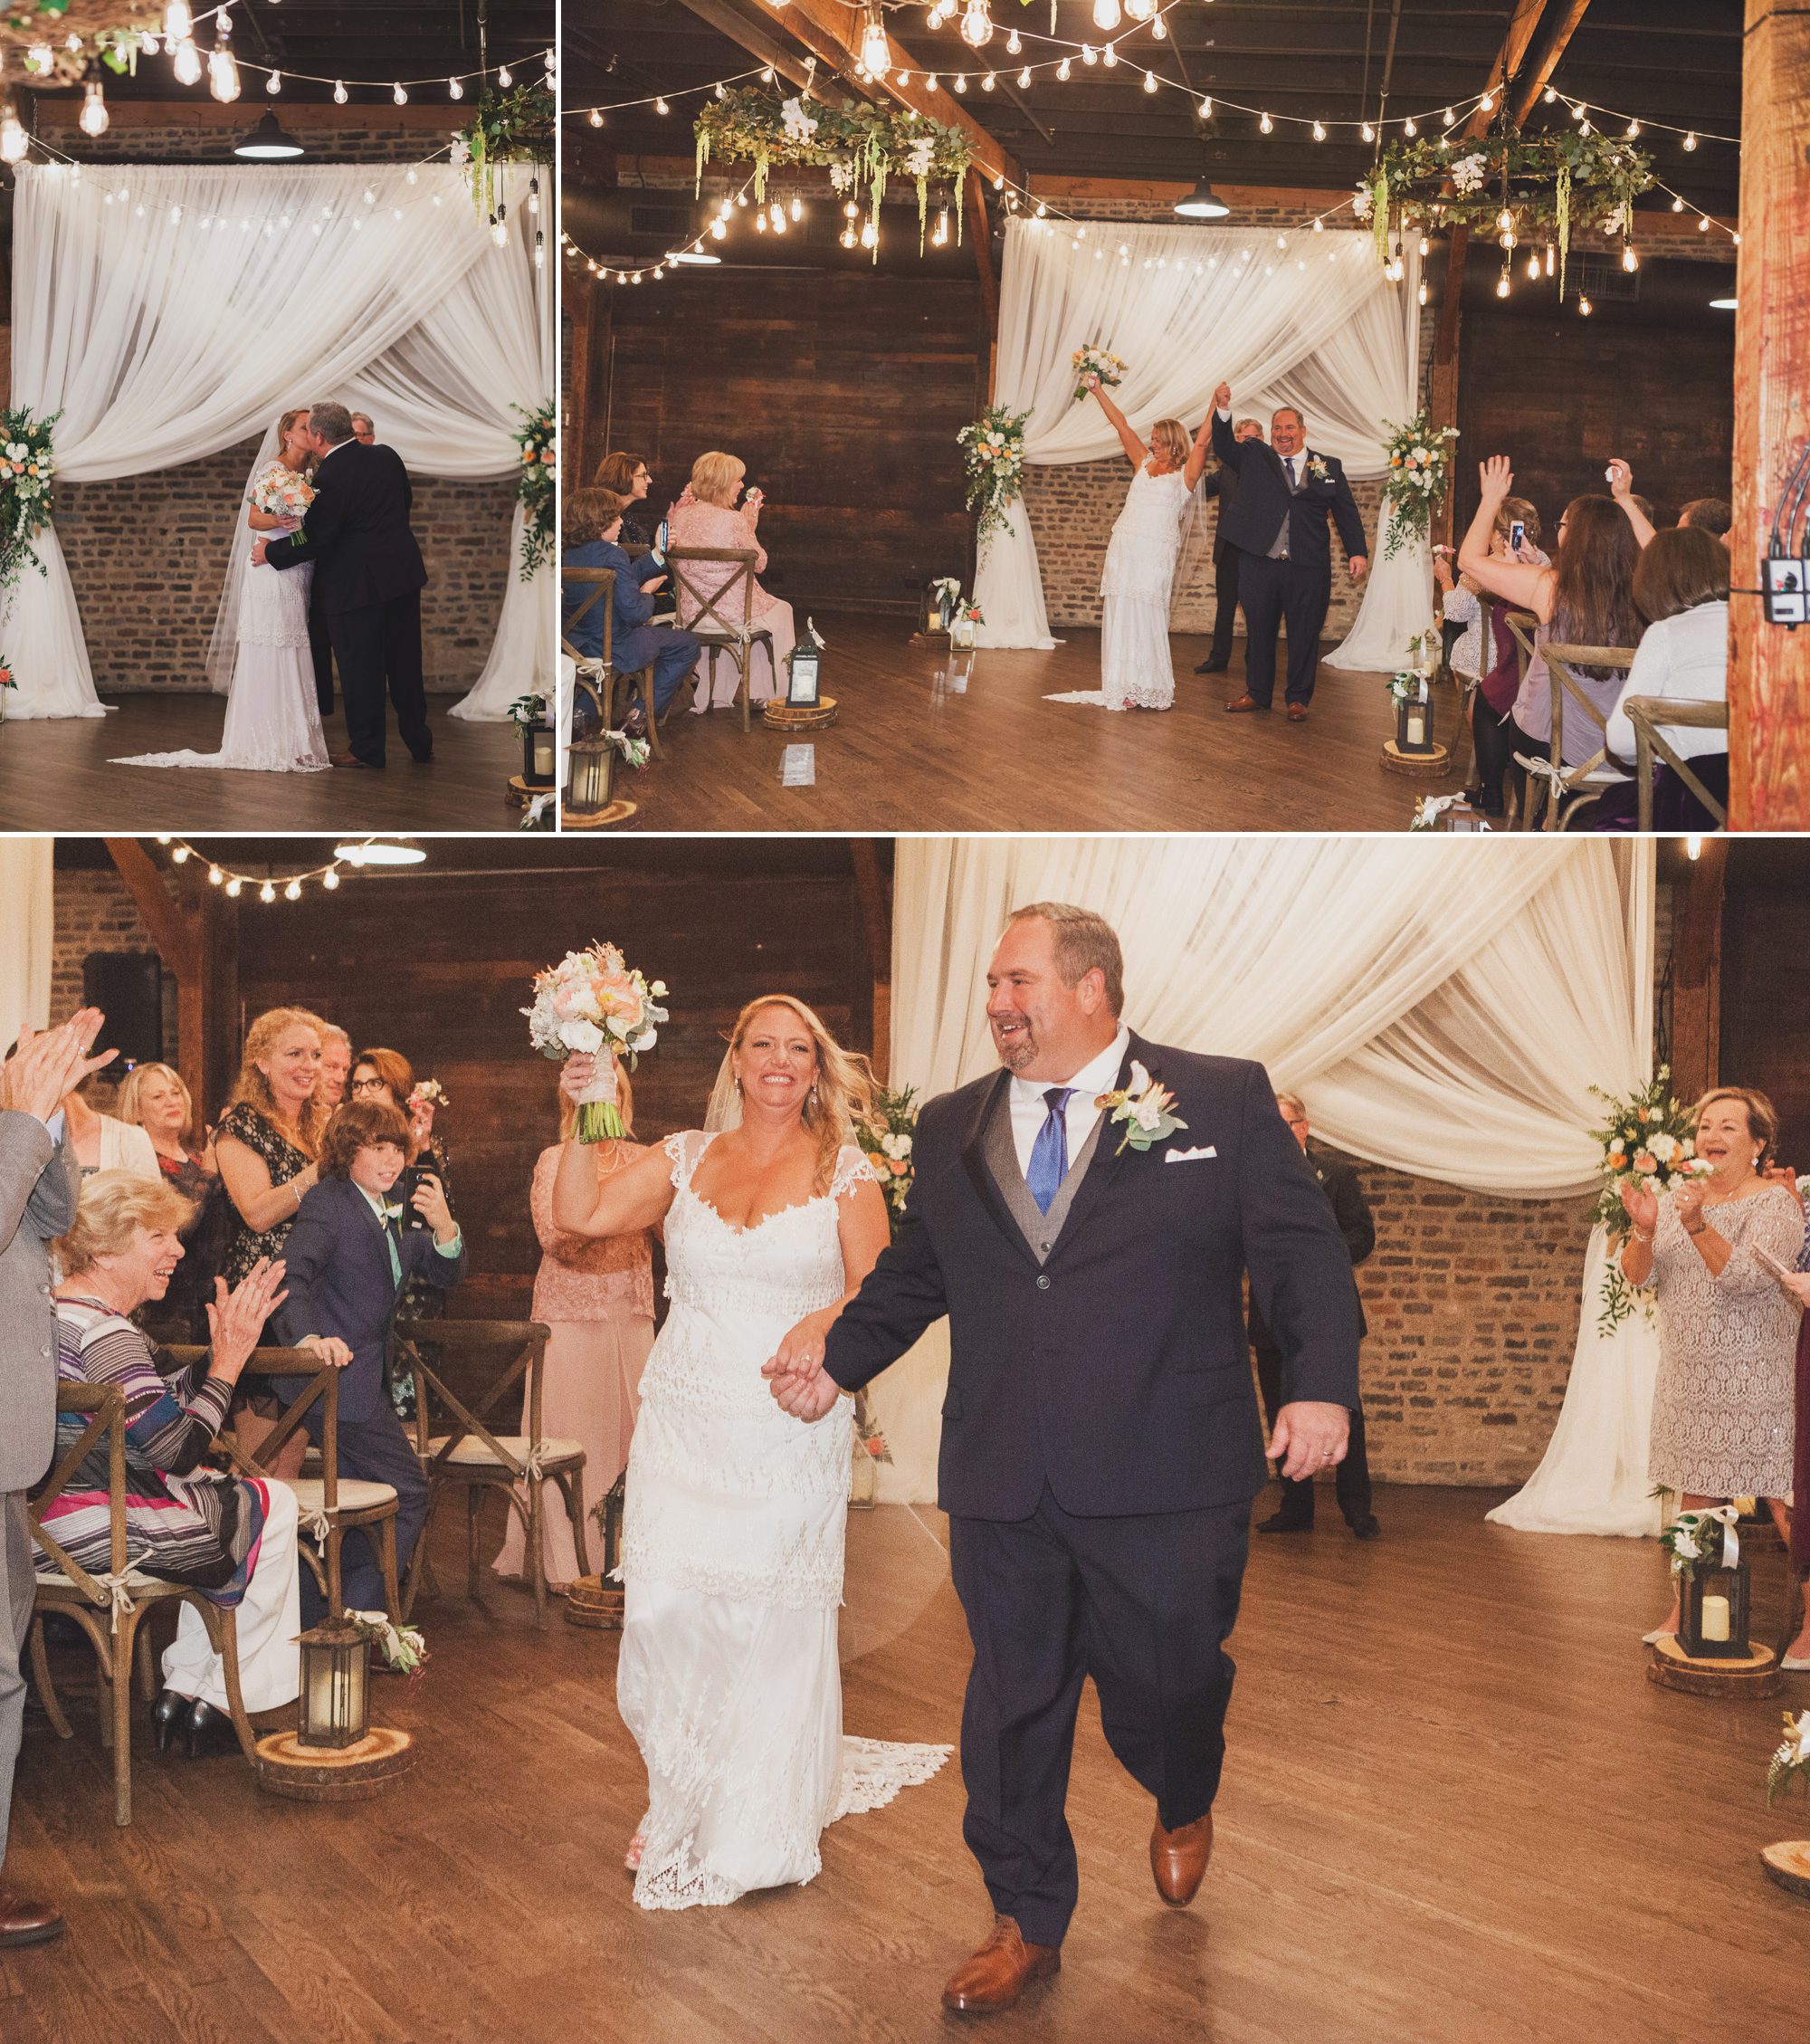 Bride and groom leave wedding recessional after ceremony  at Houston Station, Nashville TN. Photos by Krista Lee Photography.